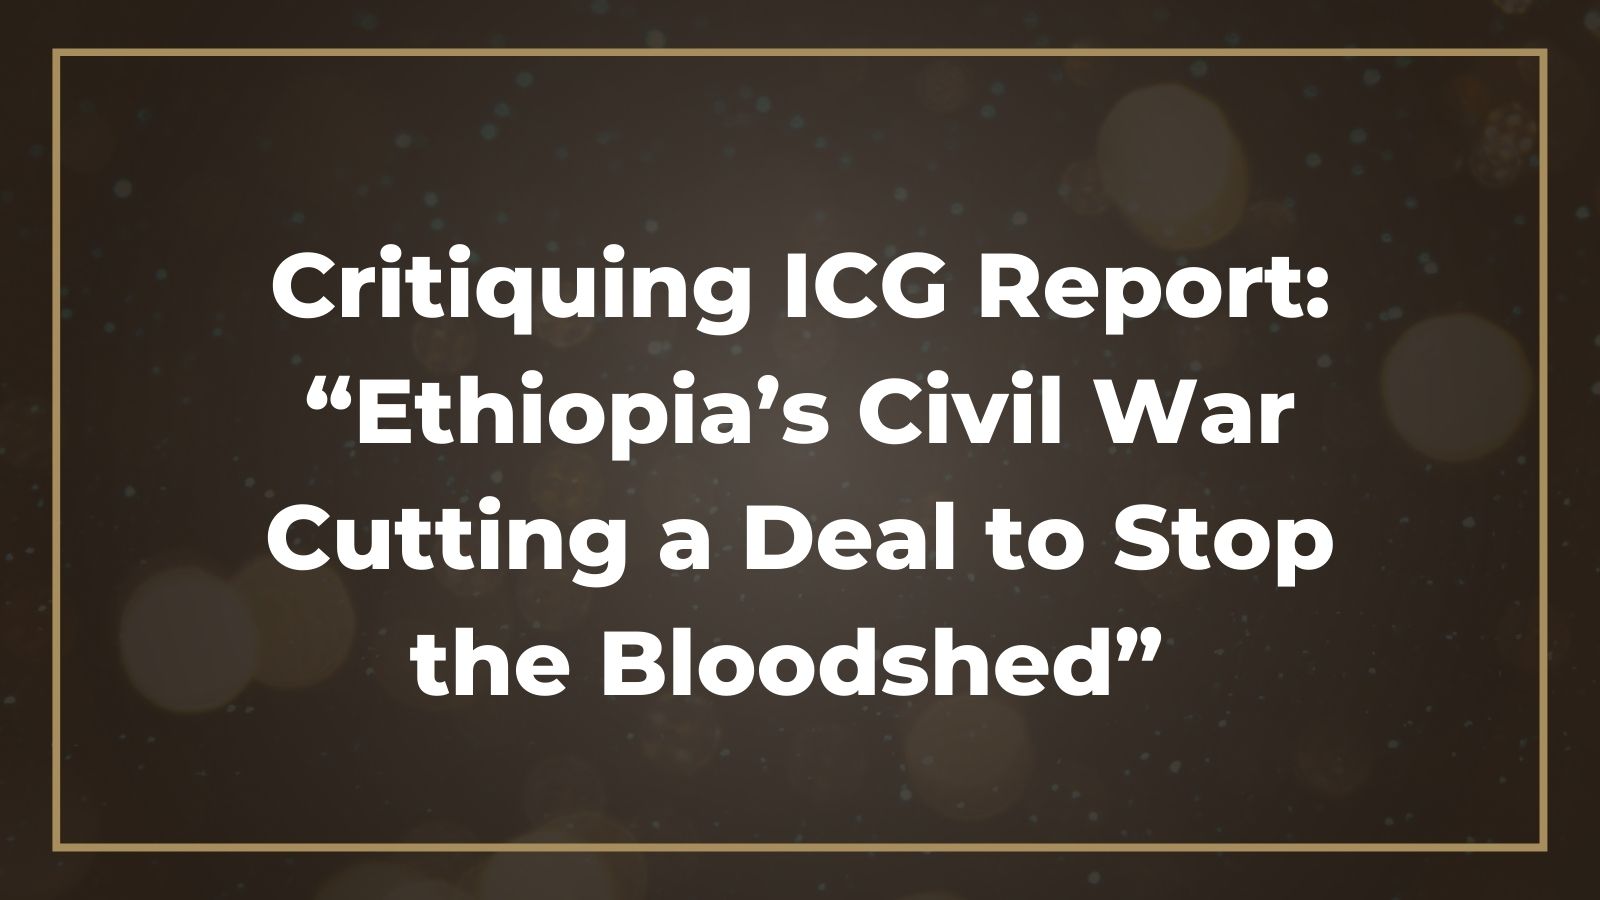 Critiquing ICG Report: “Ethiopia’s Civil War: Cutting a Deal to Stop the Bloodshed”